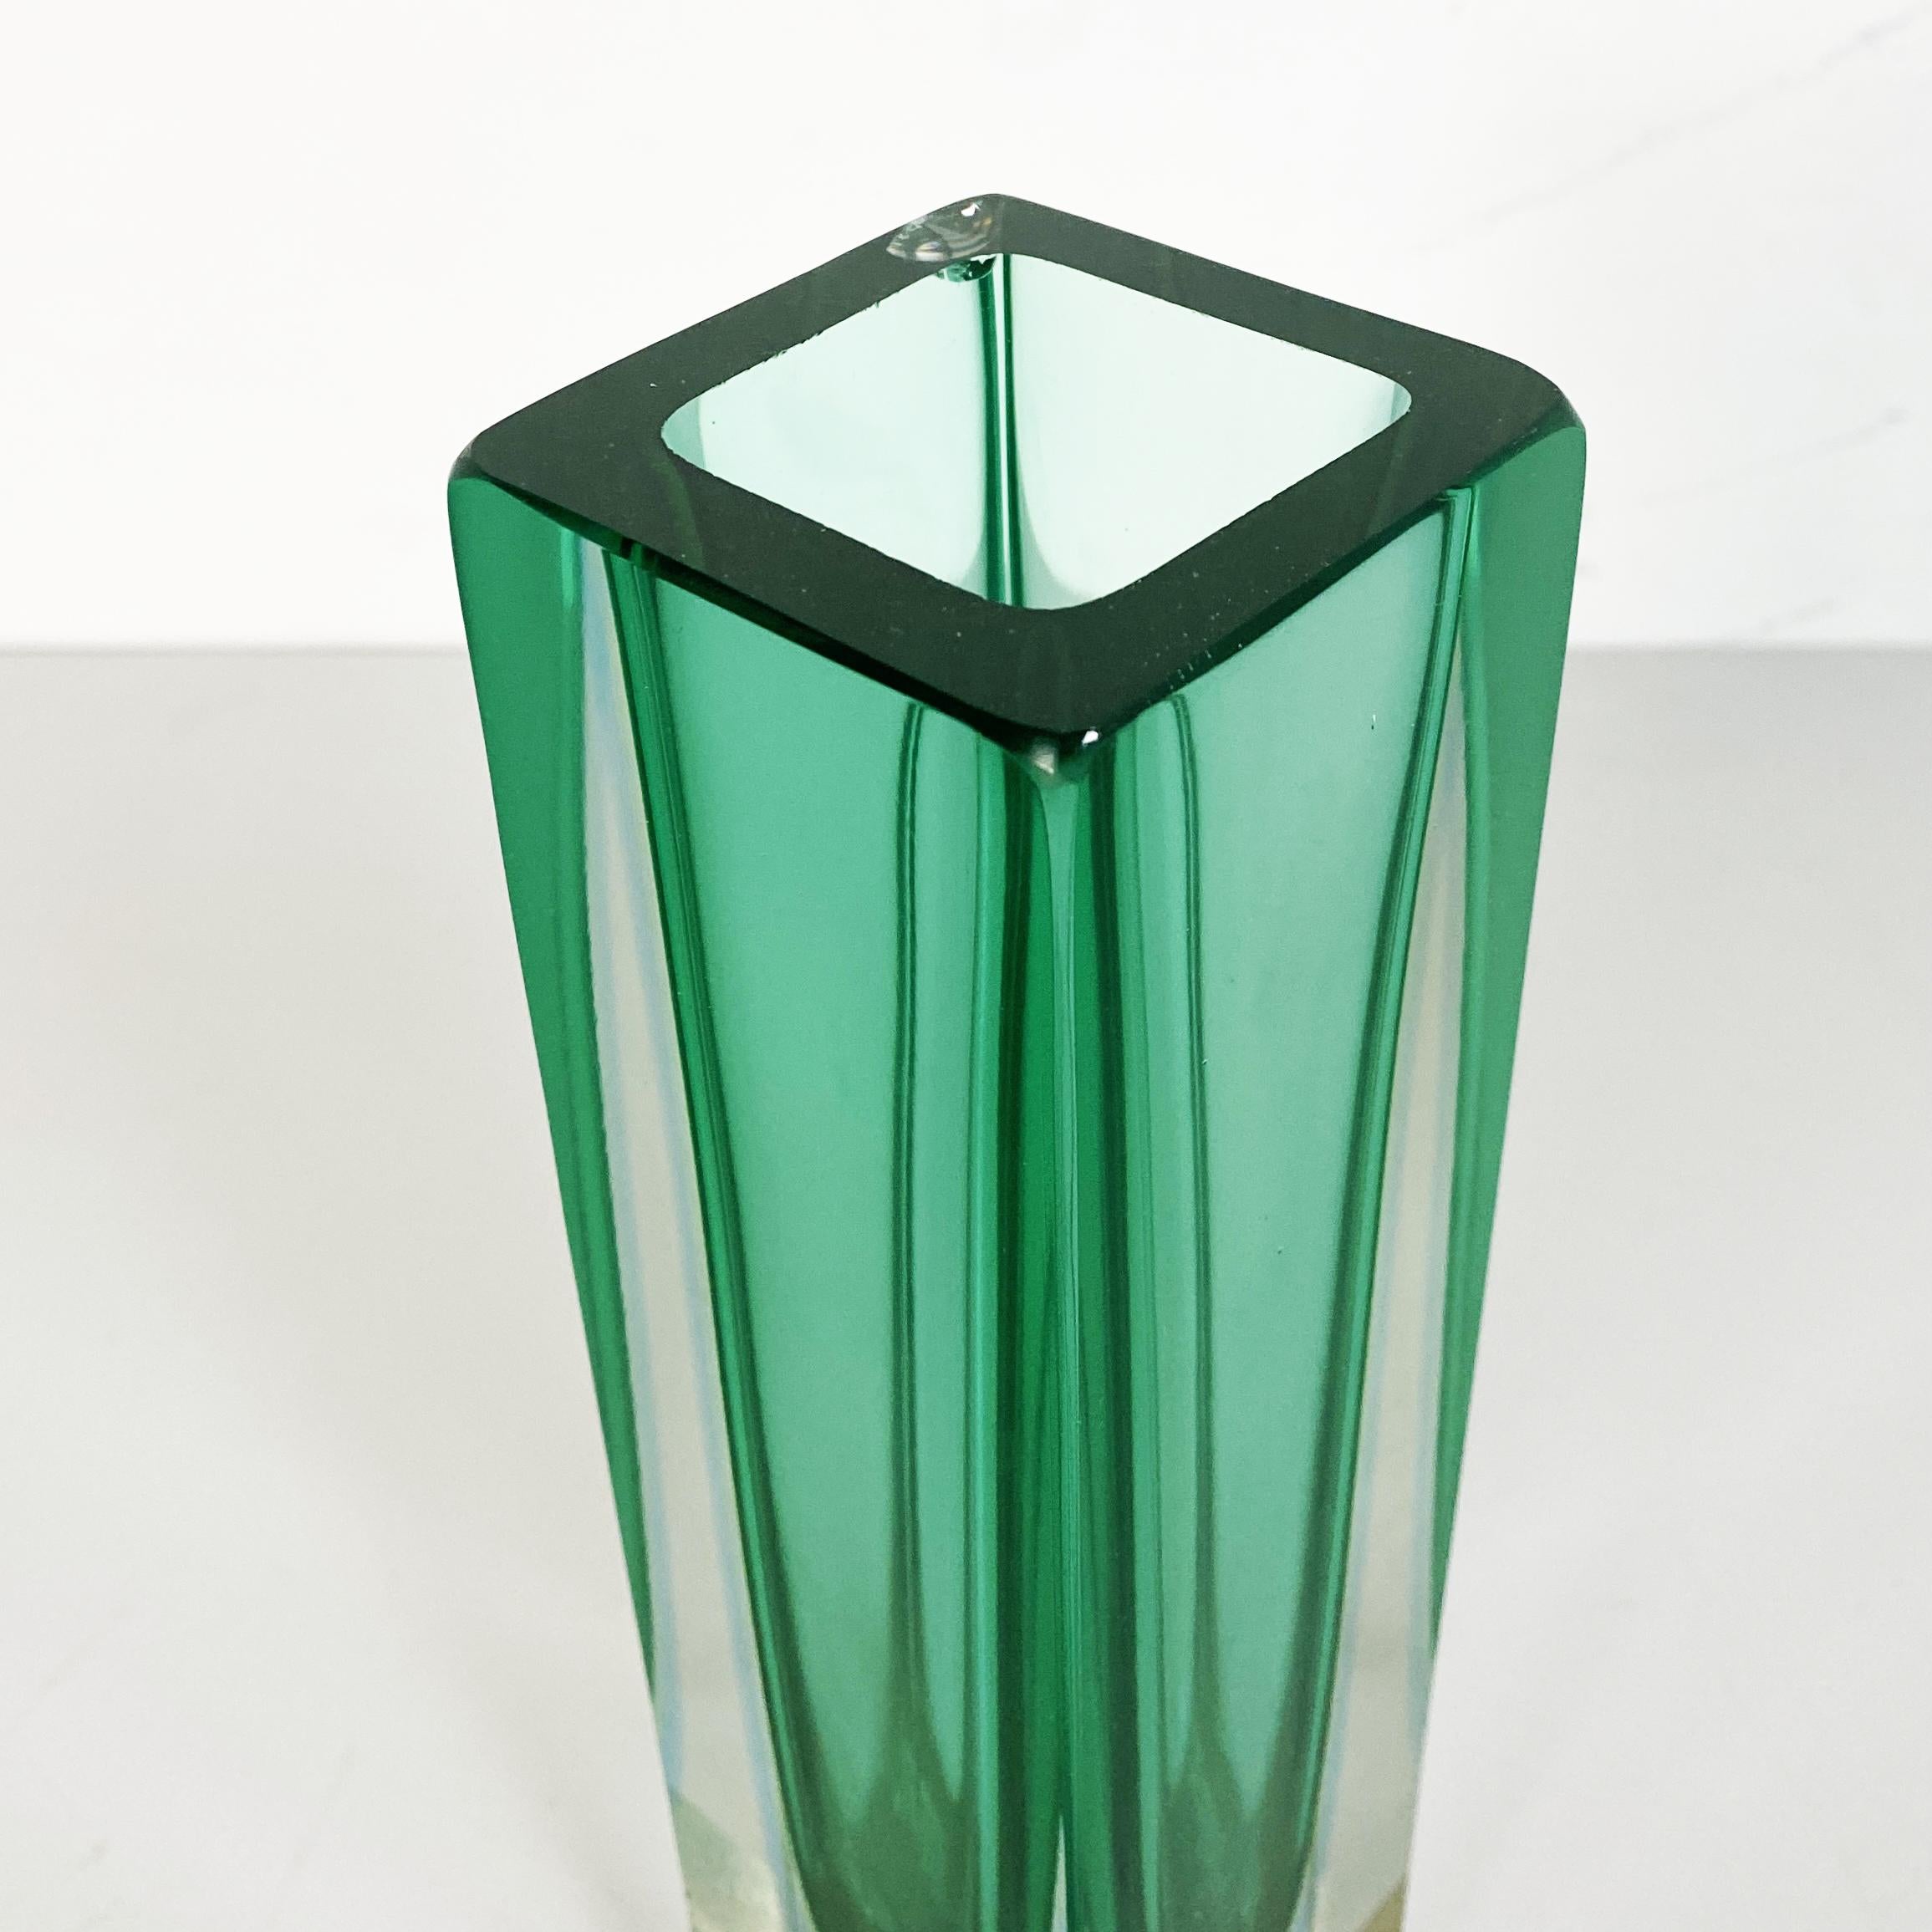 Late 20th Century Italian Mid-Century Green Murano Glass Vase with Internal Blue Shades, 1970s For Sale